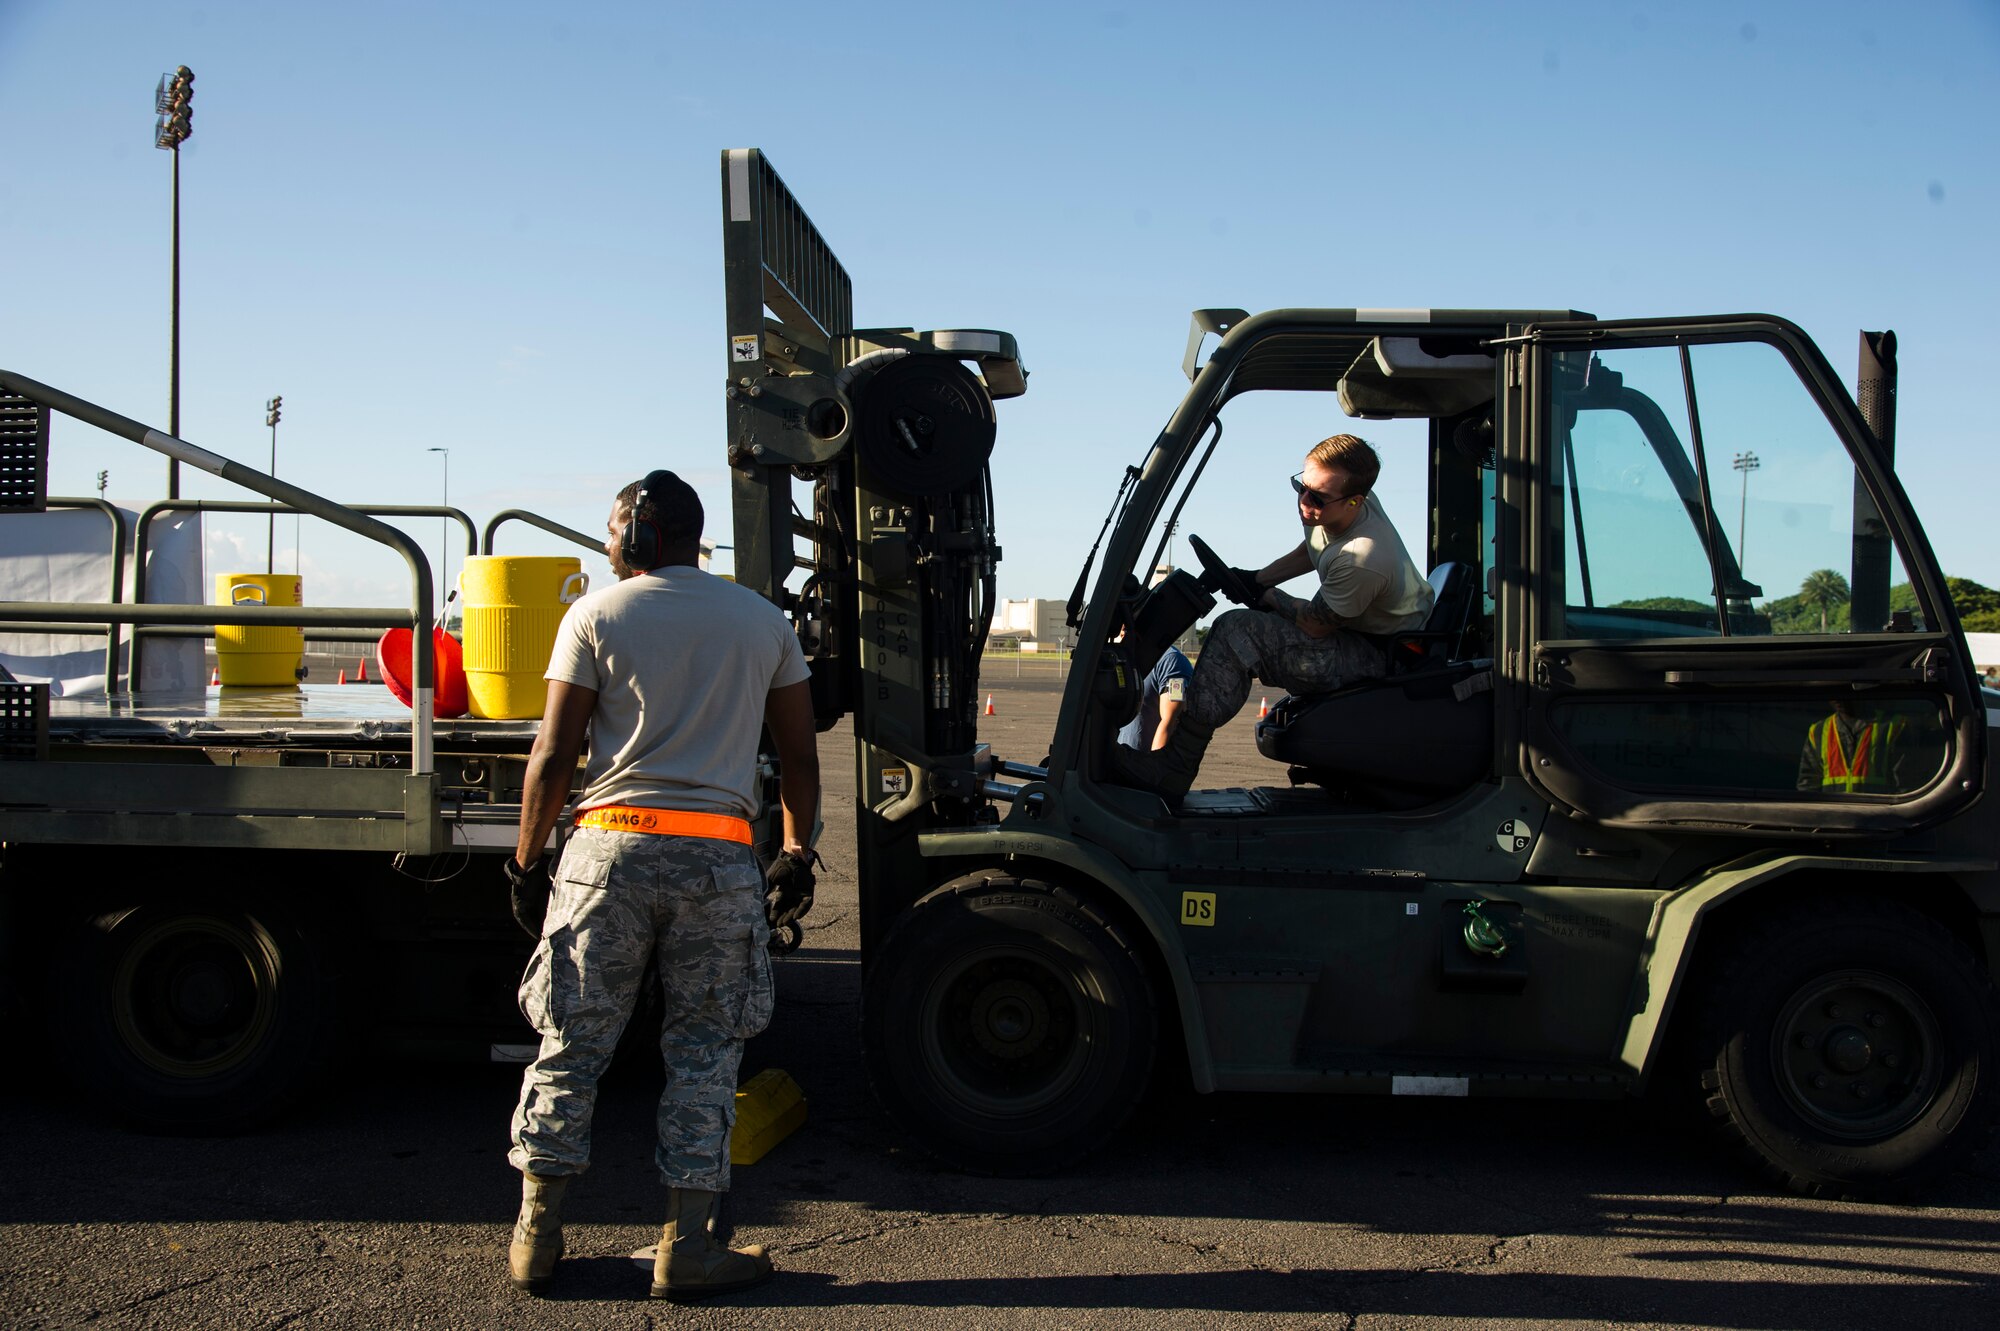 Staff Sgt. Pernell Hart, 735th Air Mobility Squadron assistance shift supervisor, guides Senior Airman Ron Motz, air freight journeyman, through the second leg of the forklift obstacle during the Hickam Port Dawg Challenge, at Joint Base Pearl Harbor-Hickam, Hawaii, Nov. 17, 2017. The aerial port community hosts a Port Dawg Challenge every year to promote professionalism, and demonstrate air and space expeditionary force capabilities. (U.S. Air Force photo by Tech. Sgt. Heather Redman)